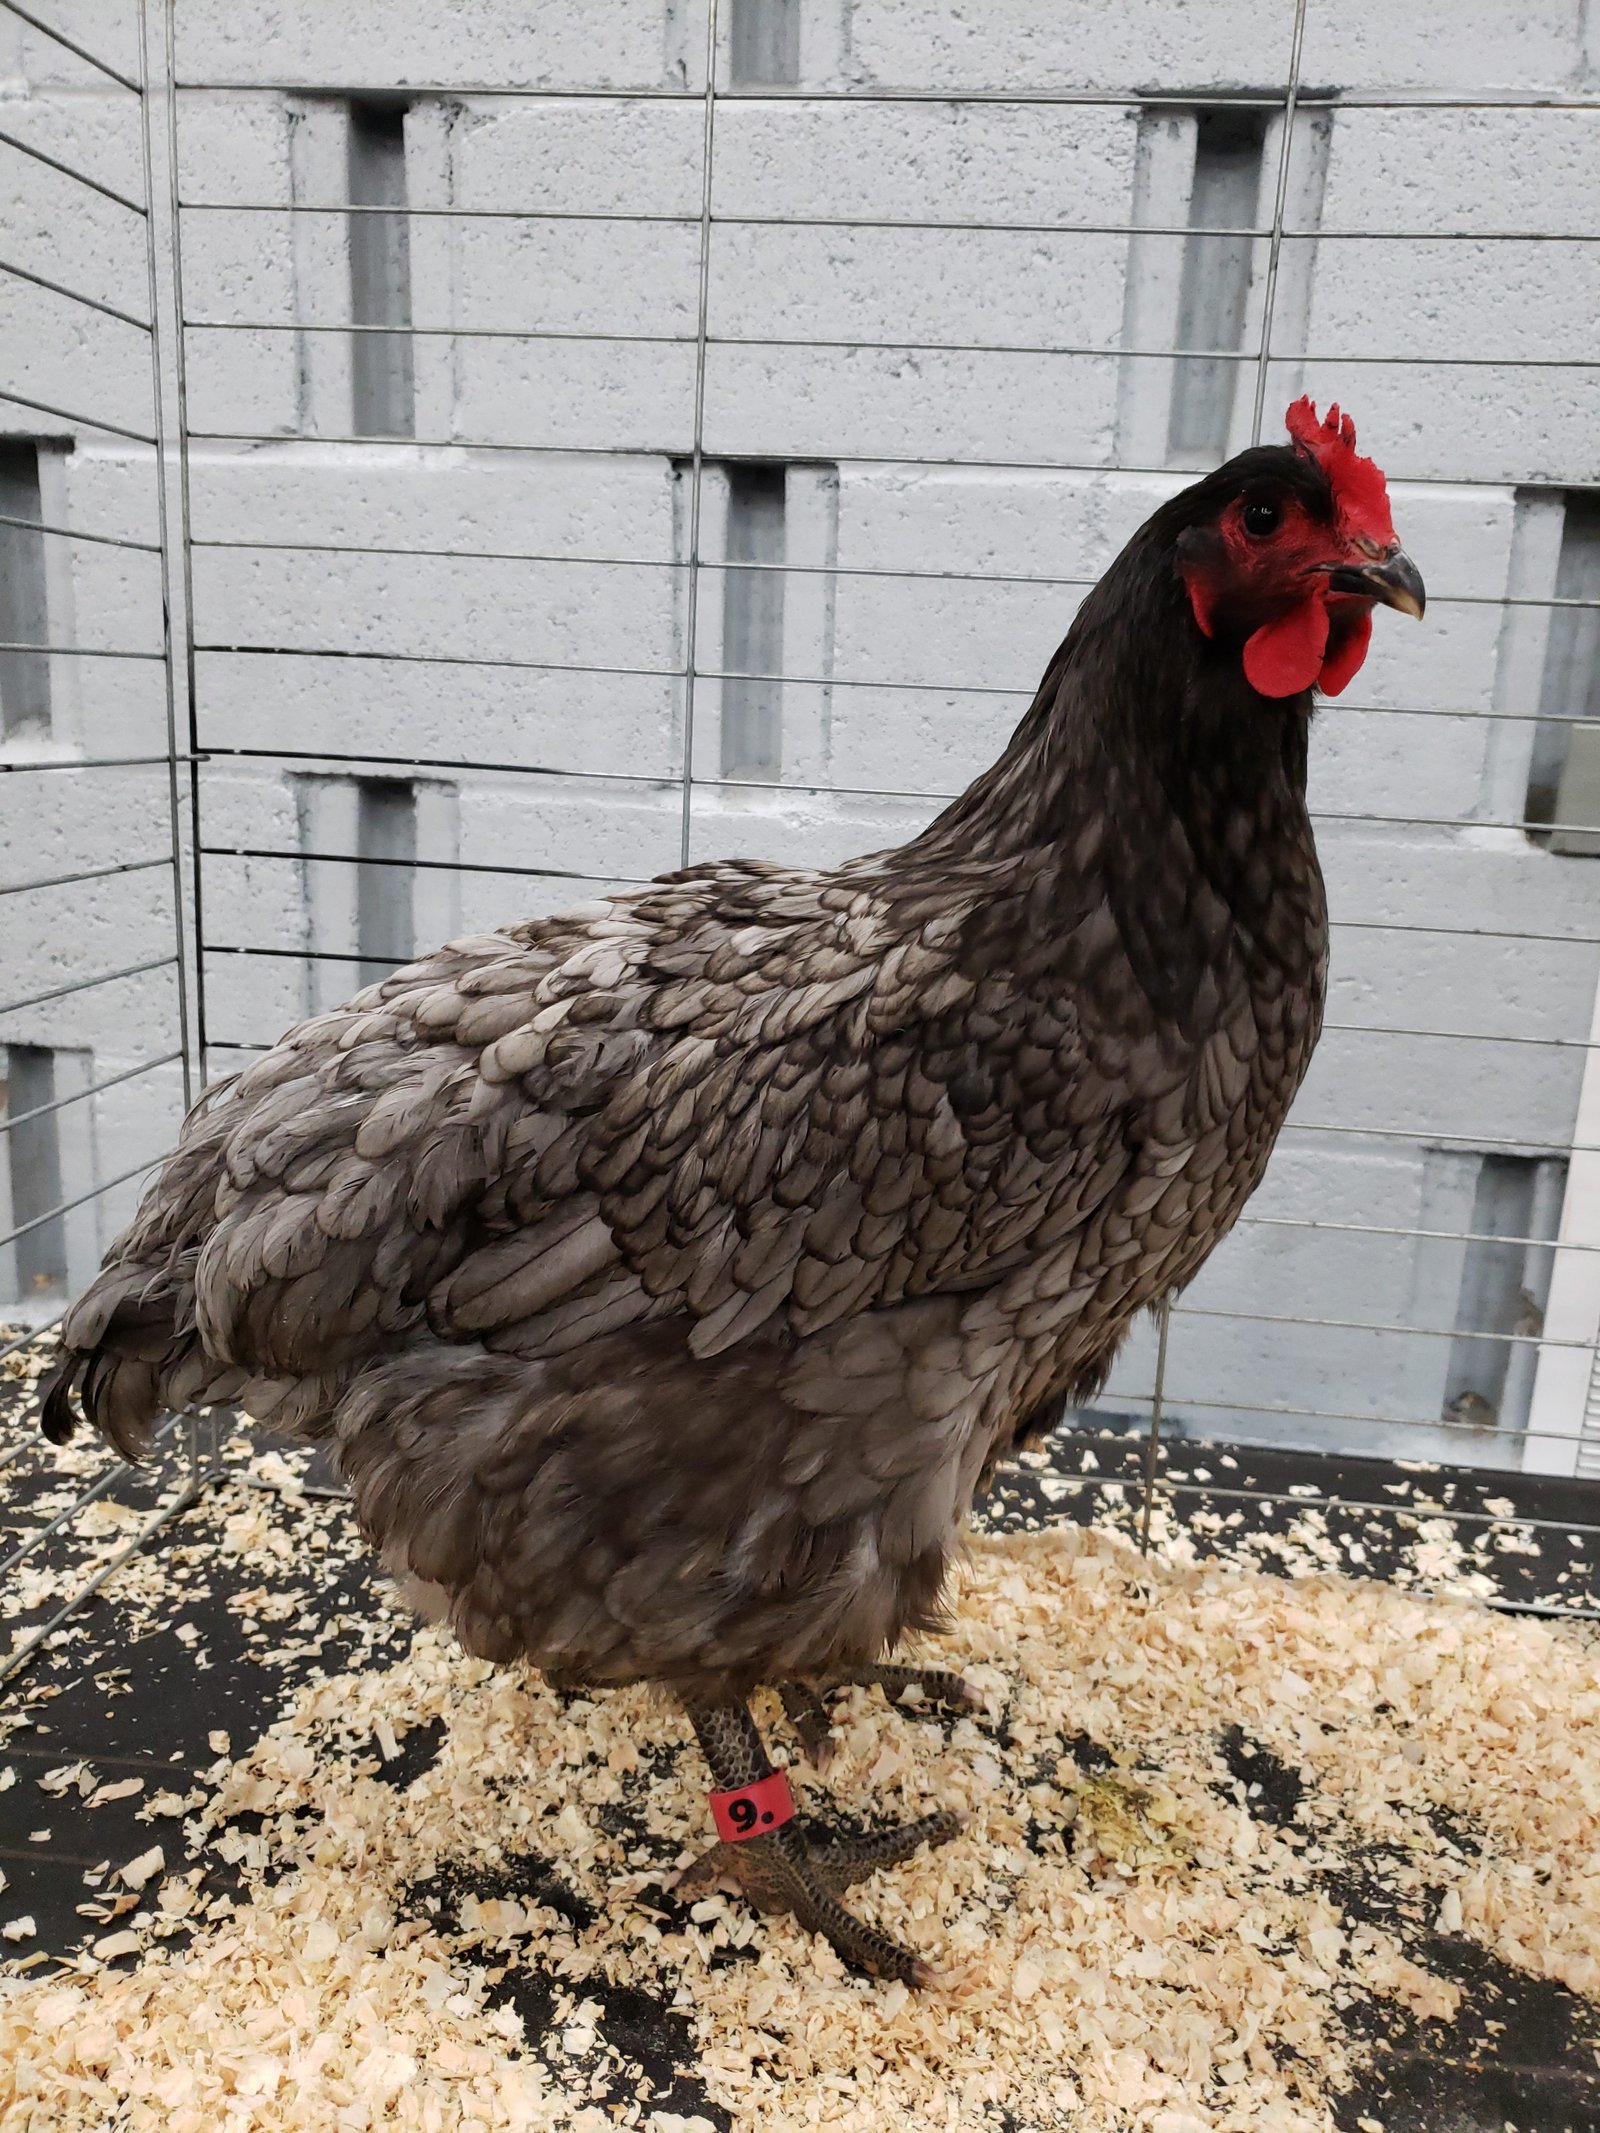 jersey giant pullets